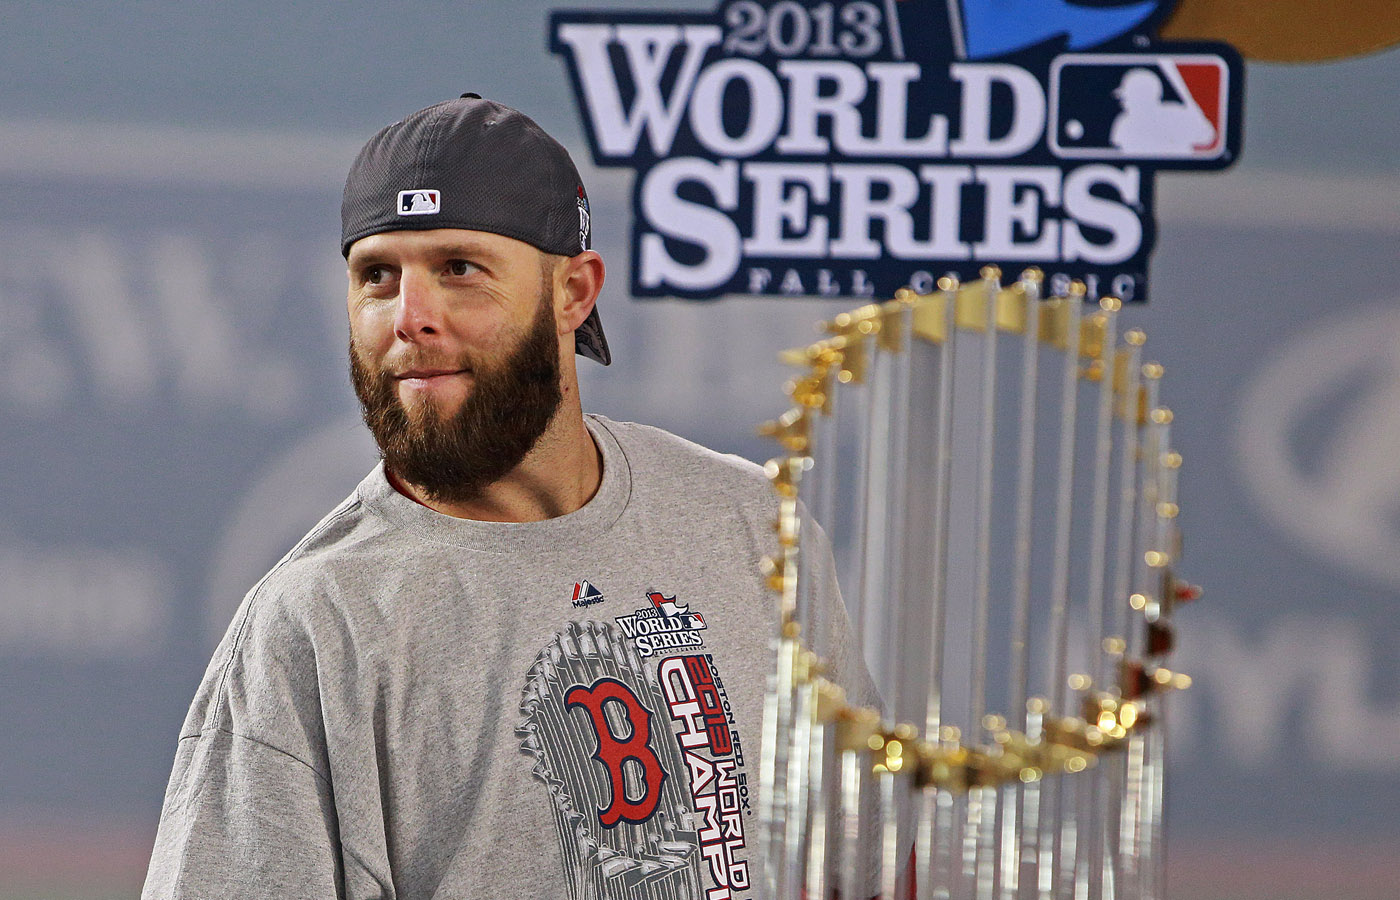 Dustin Pedroia's Gold Glove Season With Red Sox Should Be Blueprint 